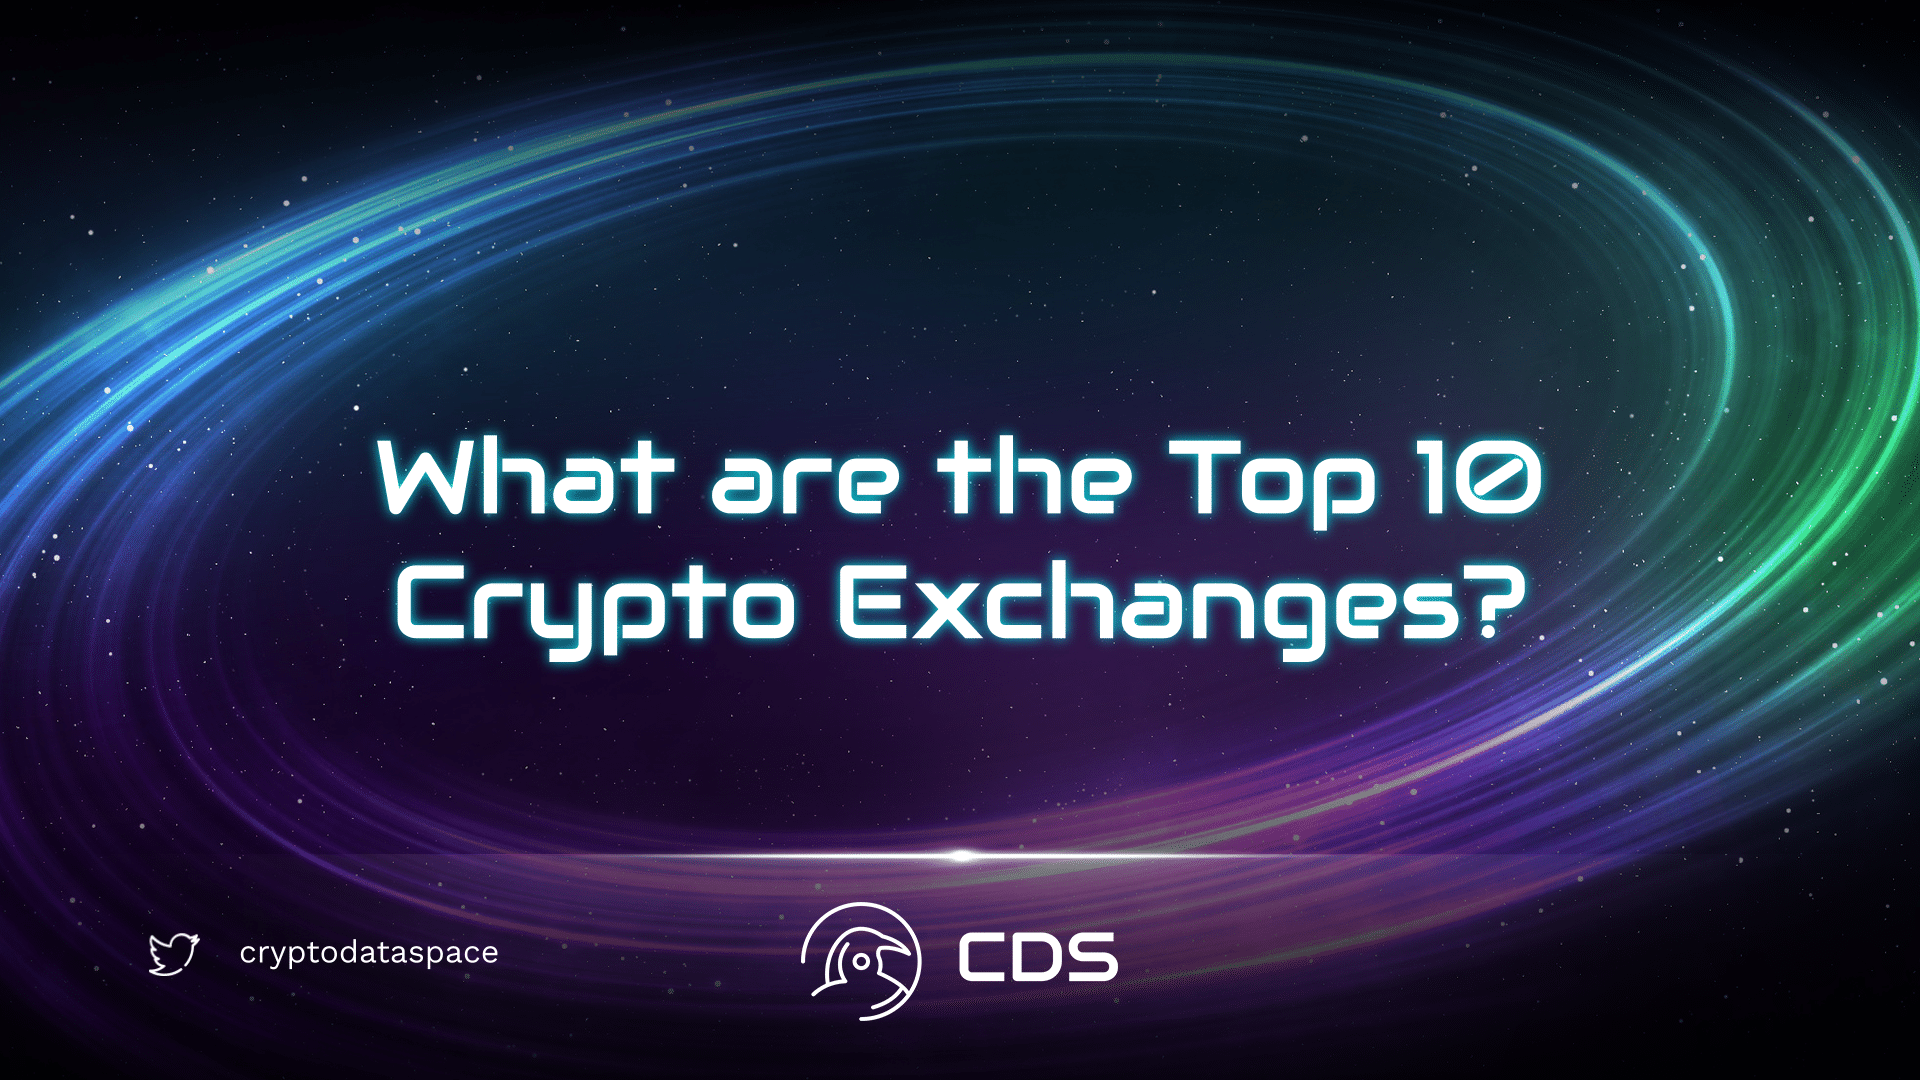 What are the Top 10 Crypto Exchanges